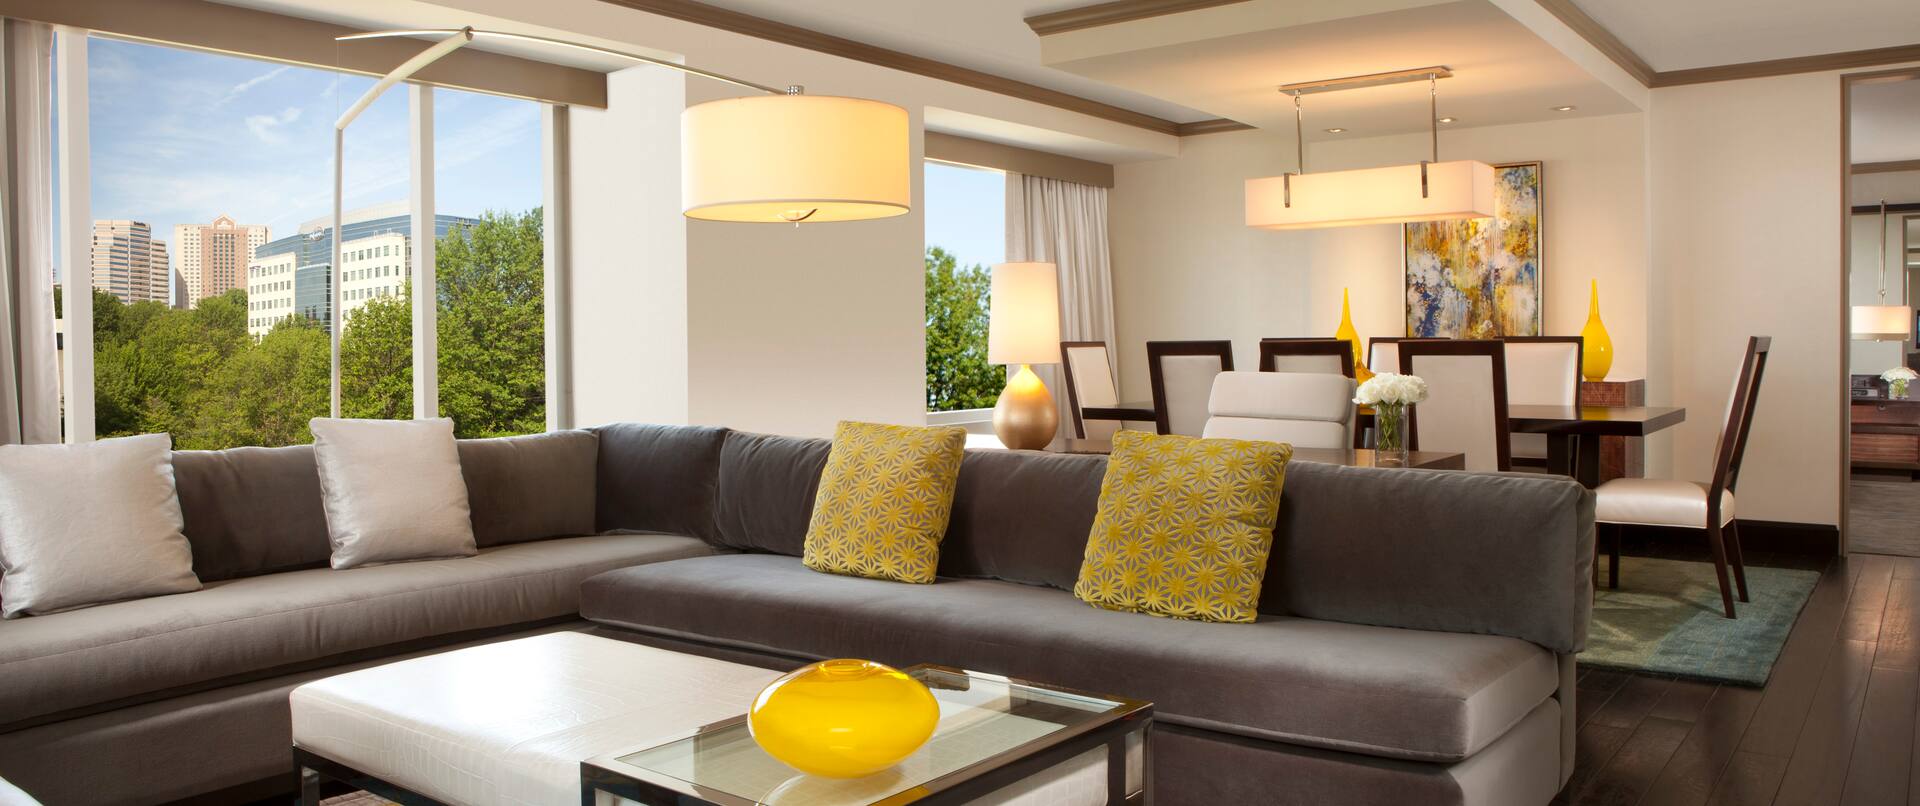 Deluxe Suite Living Area with L-Shaped Sofa, Dining Table and Chairs, and Floor-to-Ceiling Windows with Outdoor View